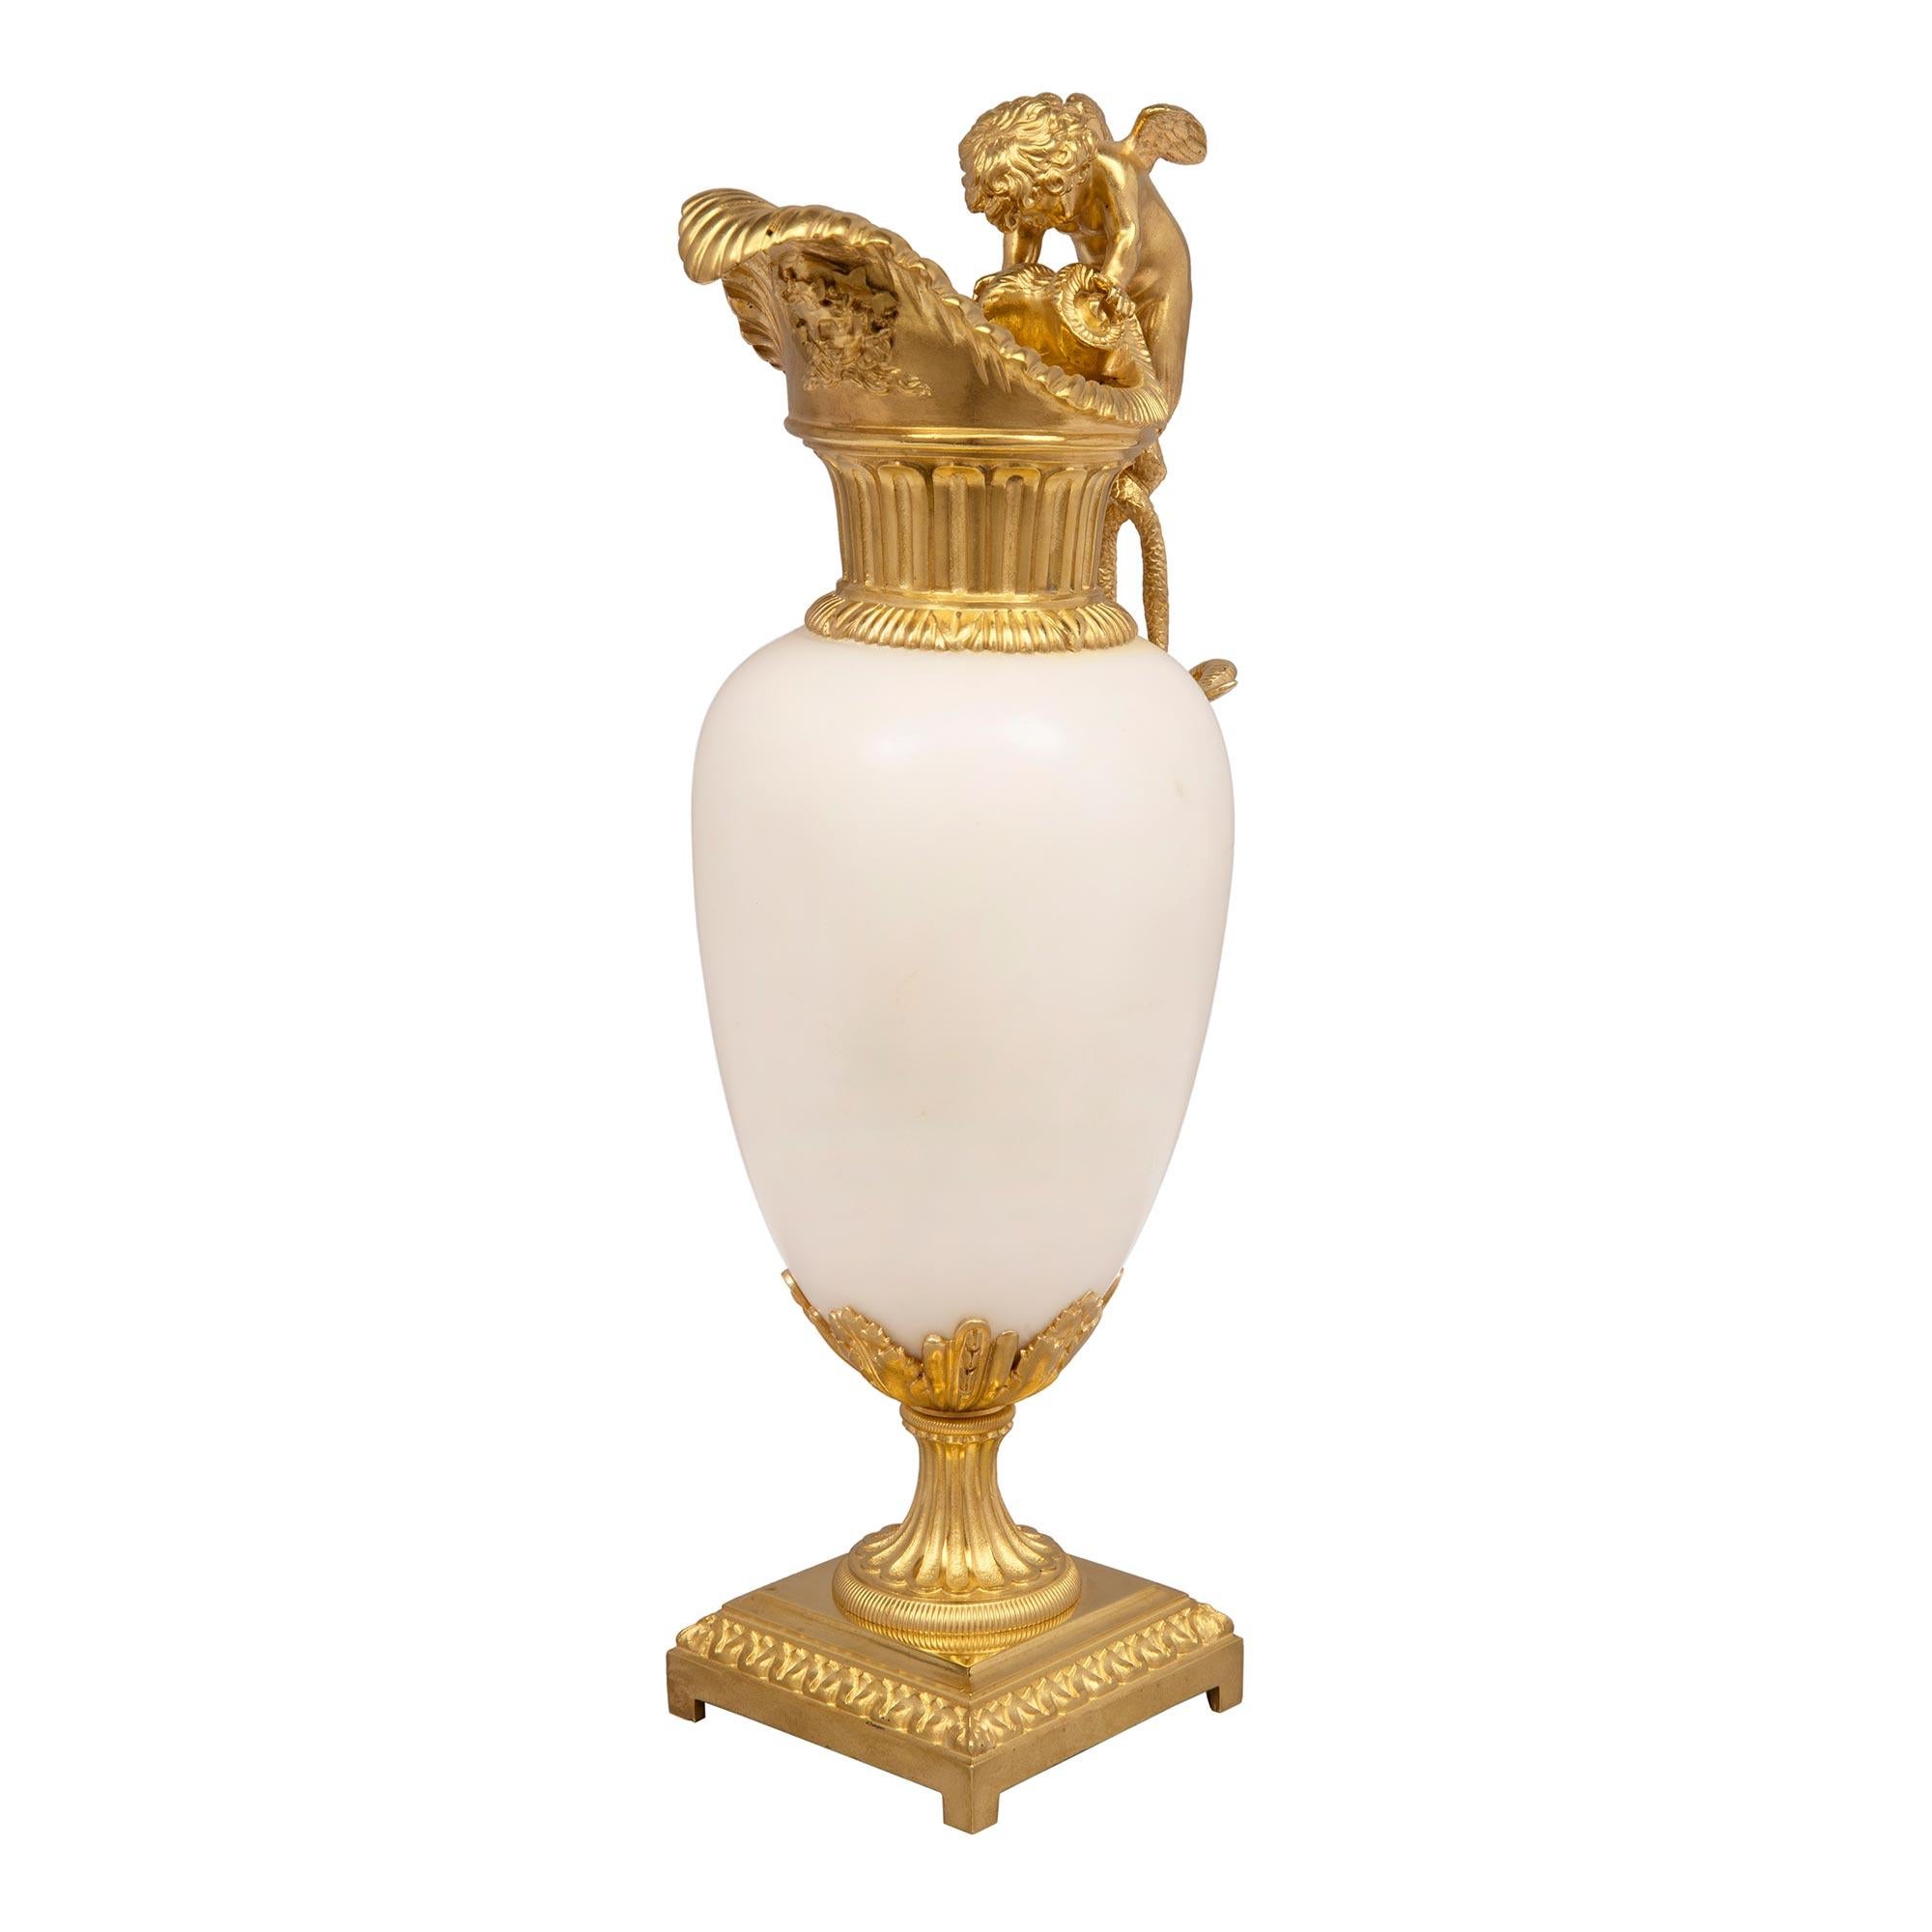 A stunning pair of French 19th century Louis XVI st. white carrara marble and ormolu ewers attributed to Henry Dasson. Each ewer is raised by square ormolu bases with fine block feet and a foliate wrap around bands. Above the fluted socle pedestals